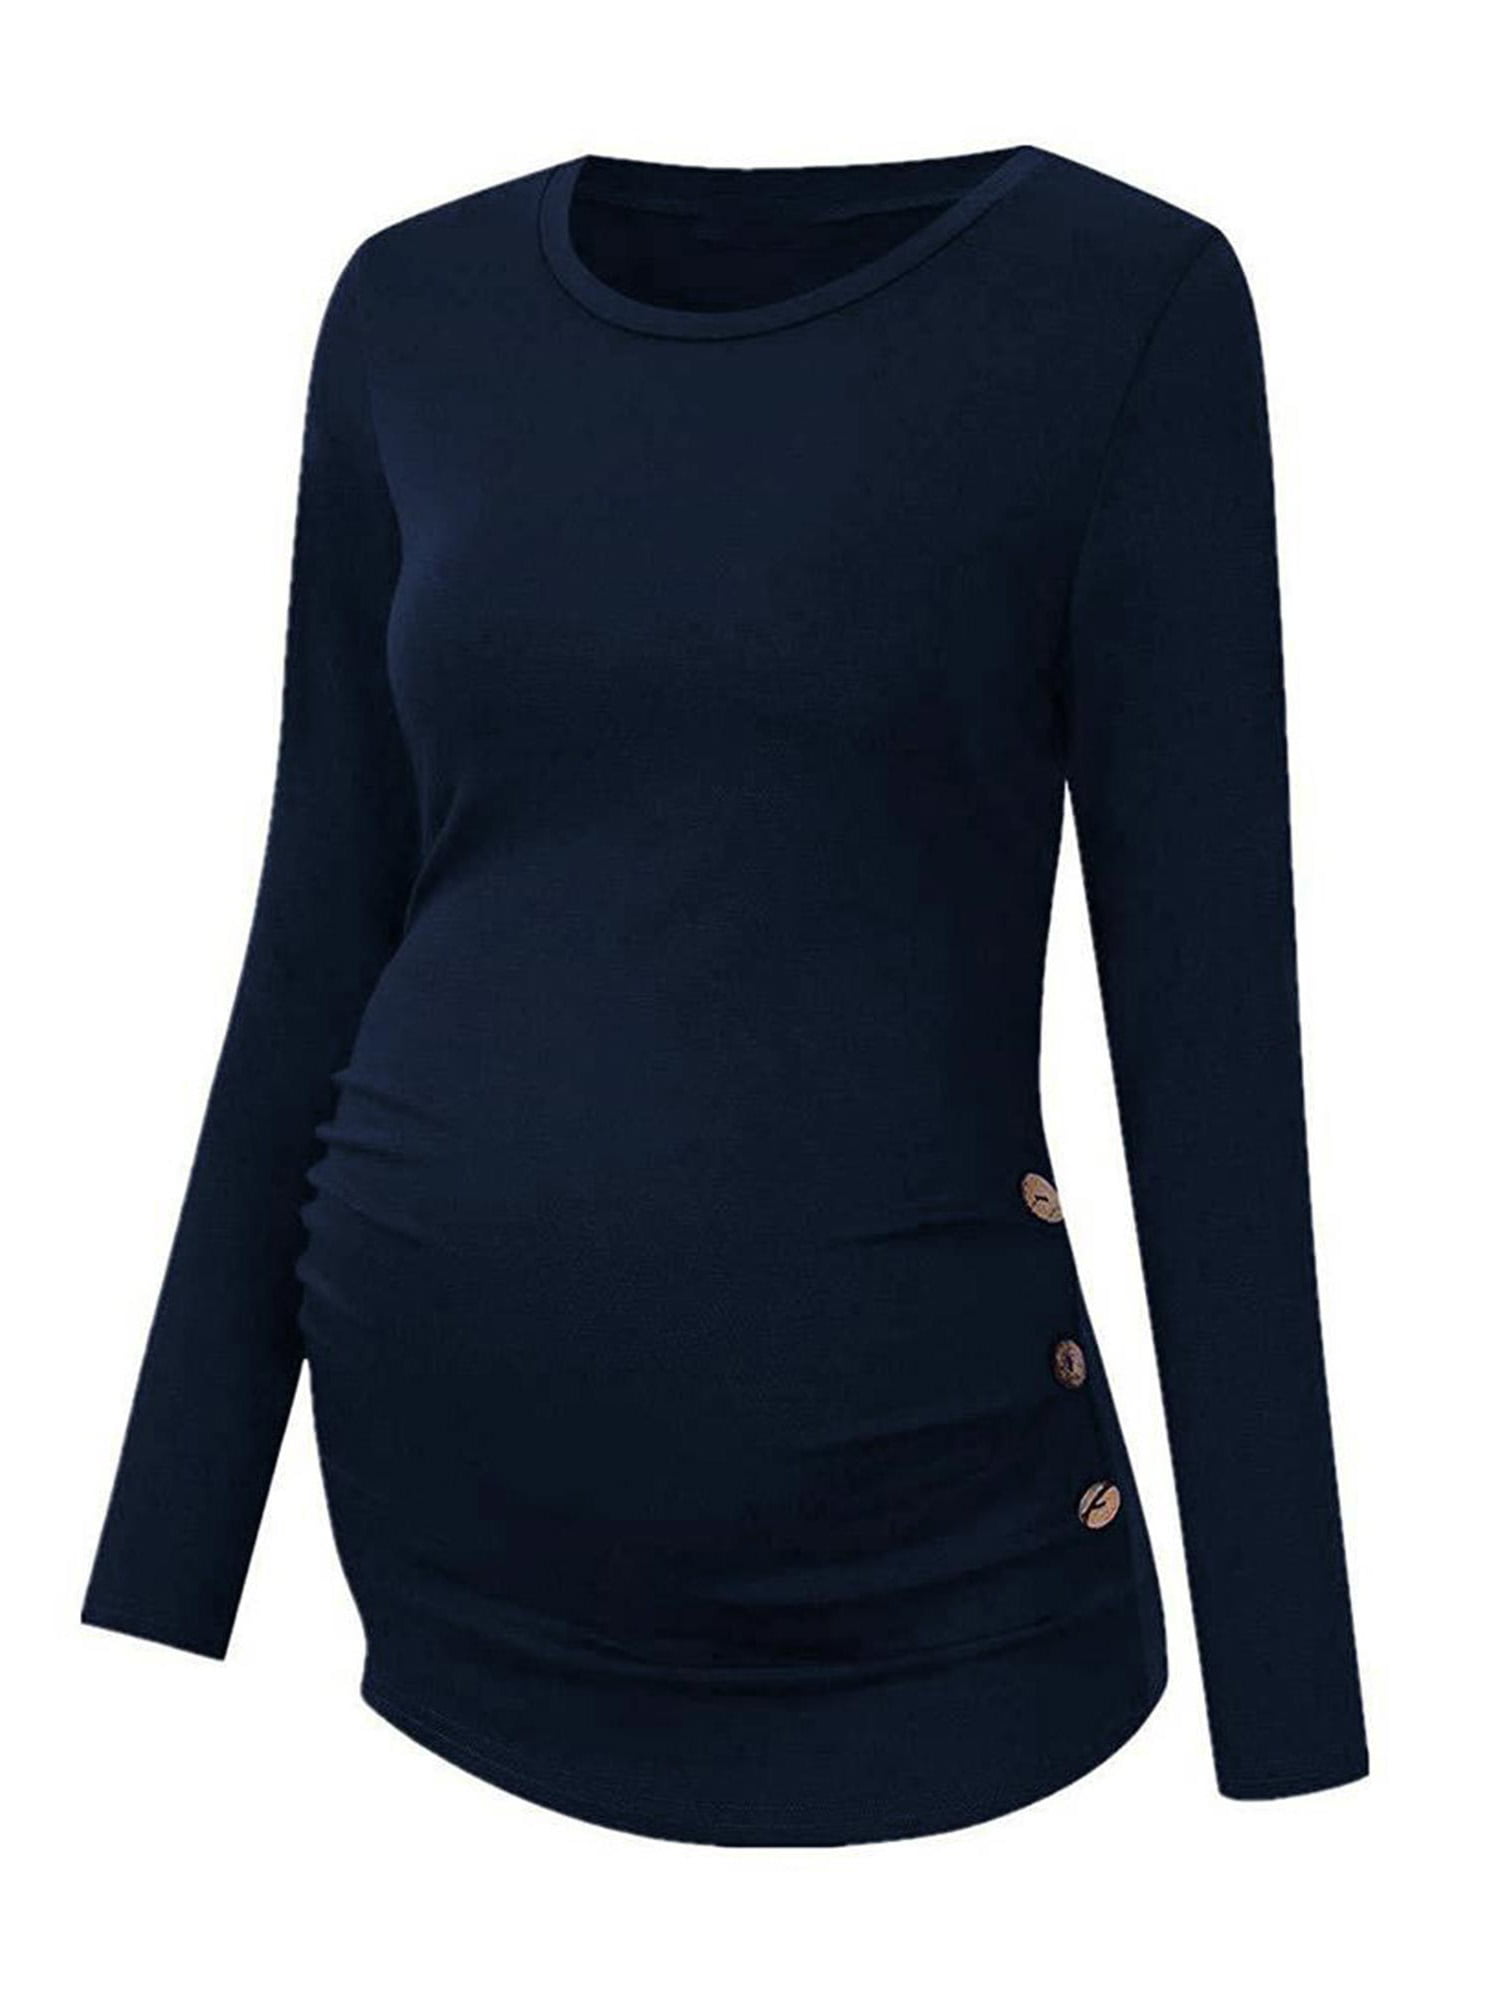 Women's Maternity Shirt Side Ruched Tunic Pregnancy Top Clothes Short Sleeve Maternity Tunic Tops Pregnancy Clothes 